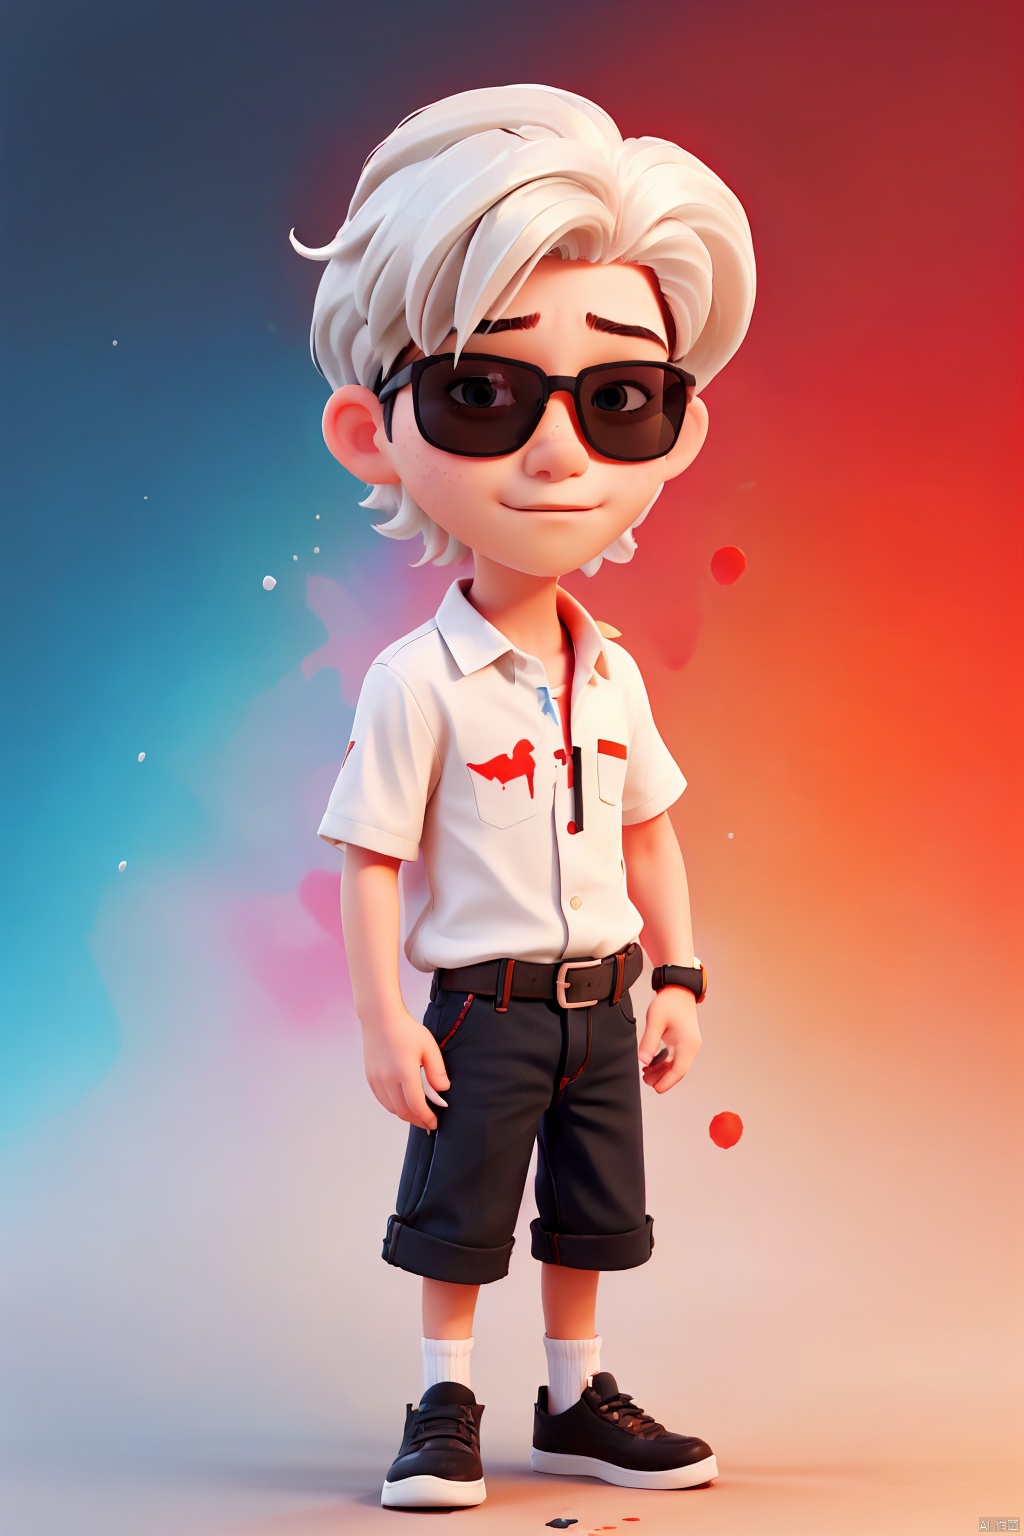  //
( code background), (data background,:1.2),
//
multicolored_background,red and white background,sam yang, (1boy:1.3), (short white hair,hair slicked back,:1.2)black sunglasses, expressionless,cowboy shot, no_eyes,(colored inner hair, colored_tips,:1.2), shota, ink style, 90s, Light-electric style, BJ_Violent_graffiti, saibo